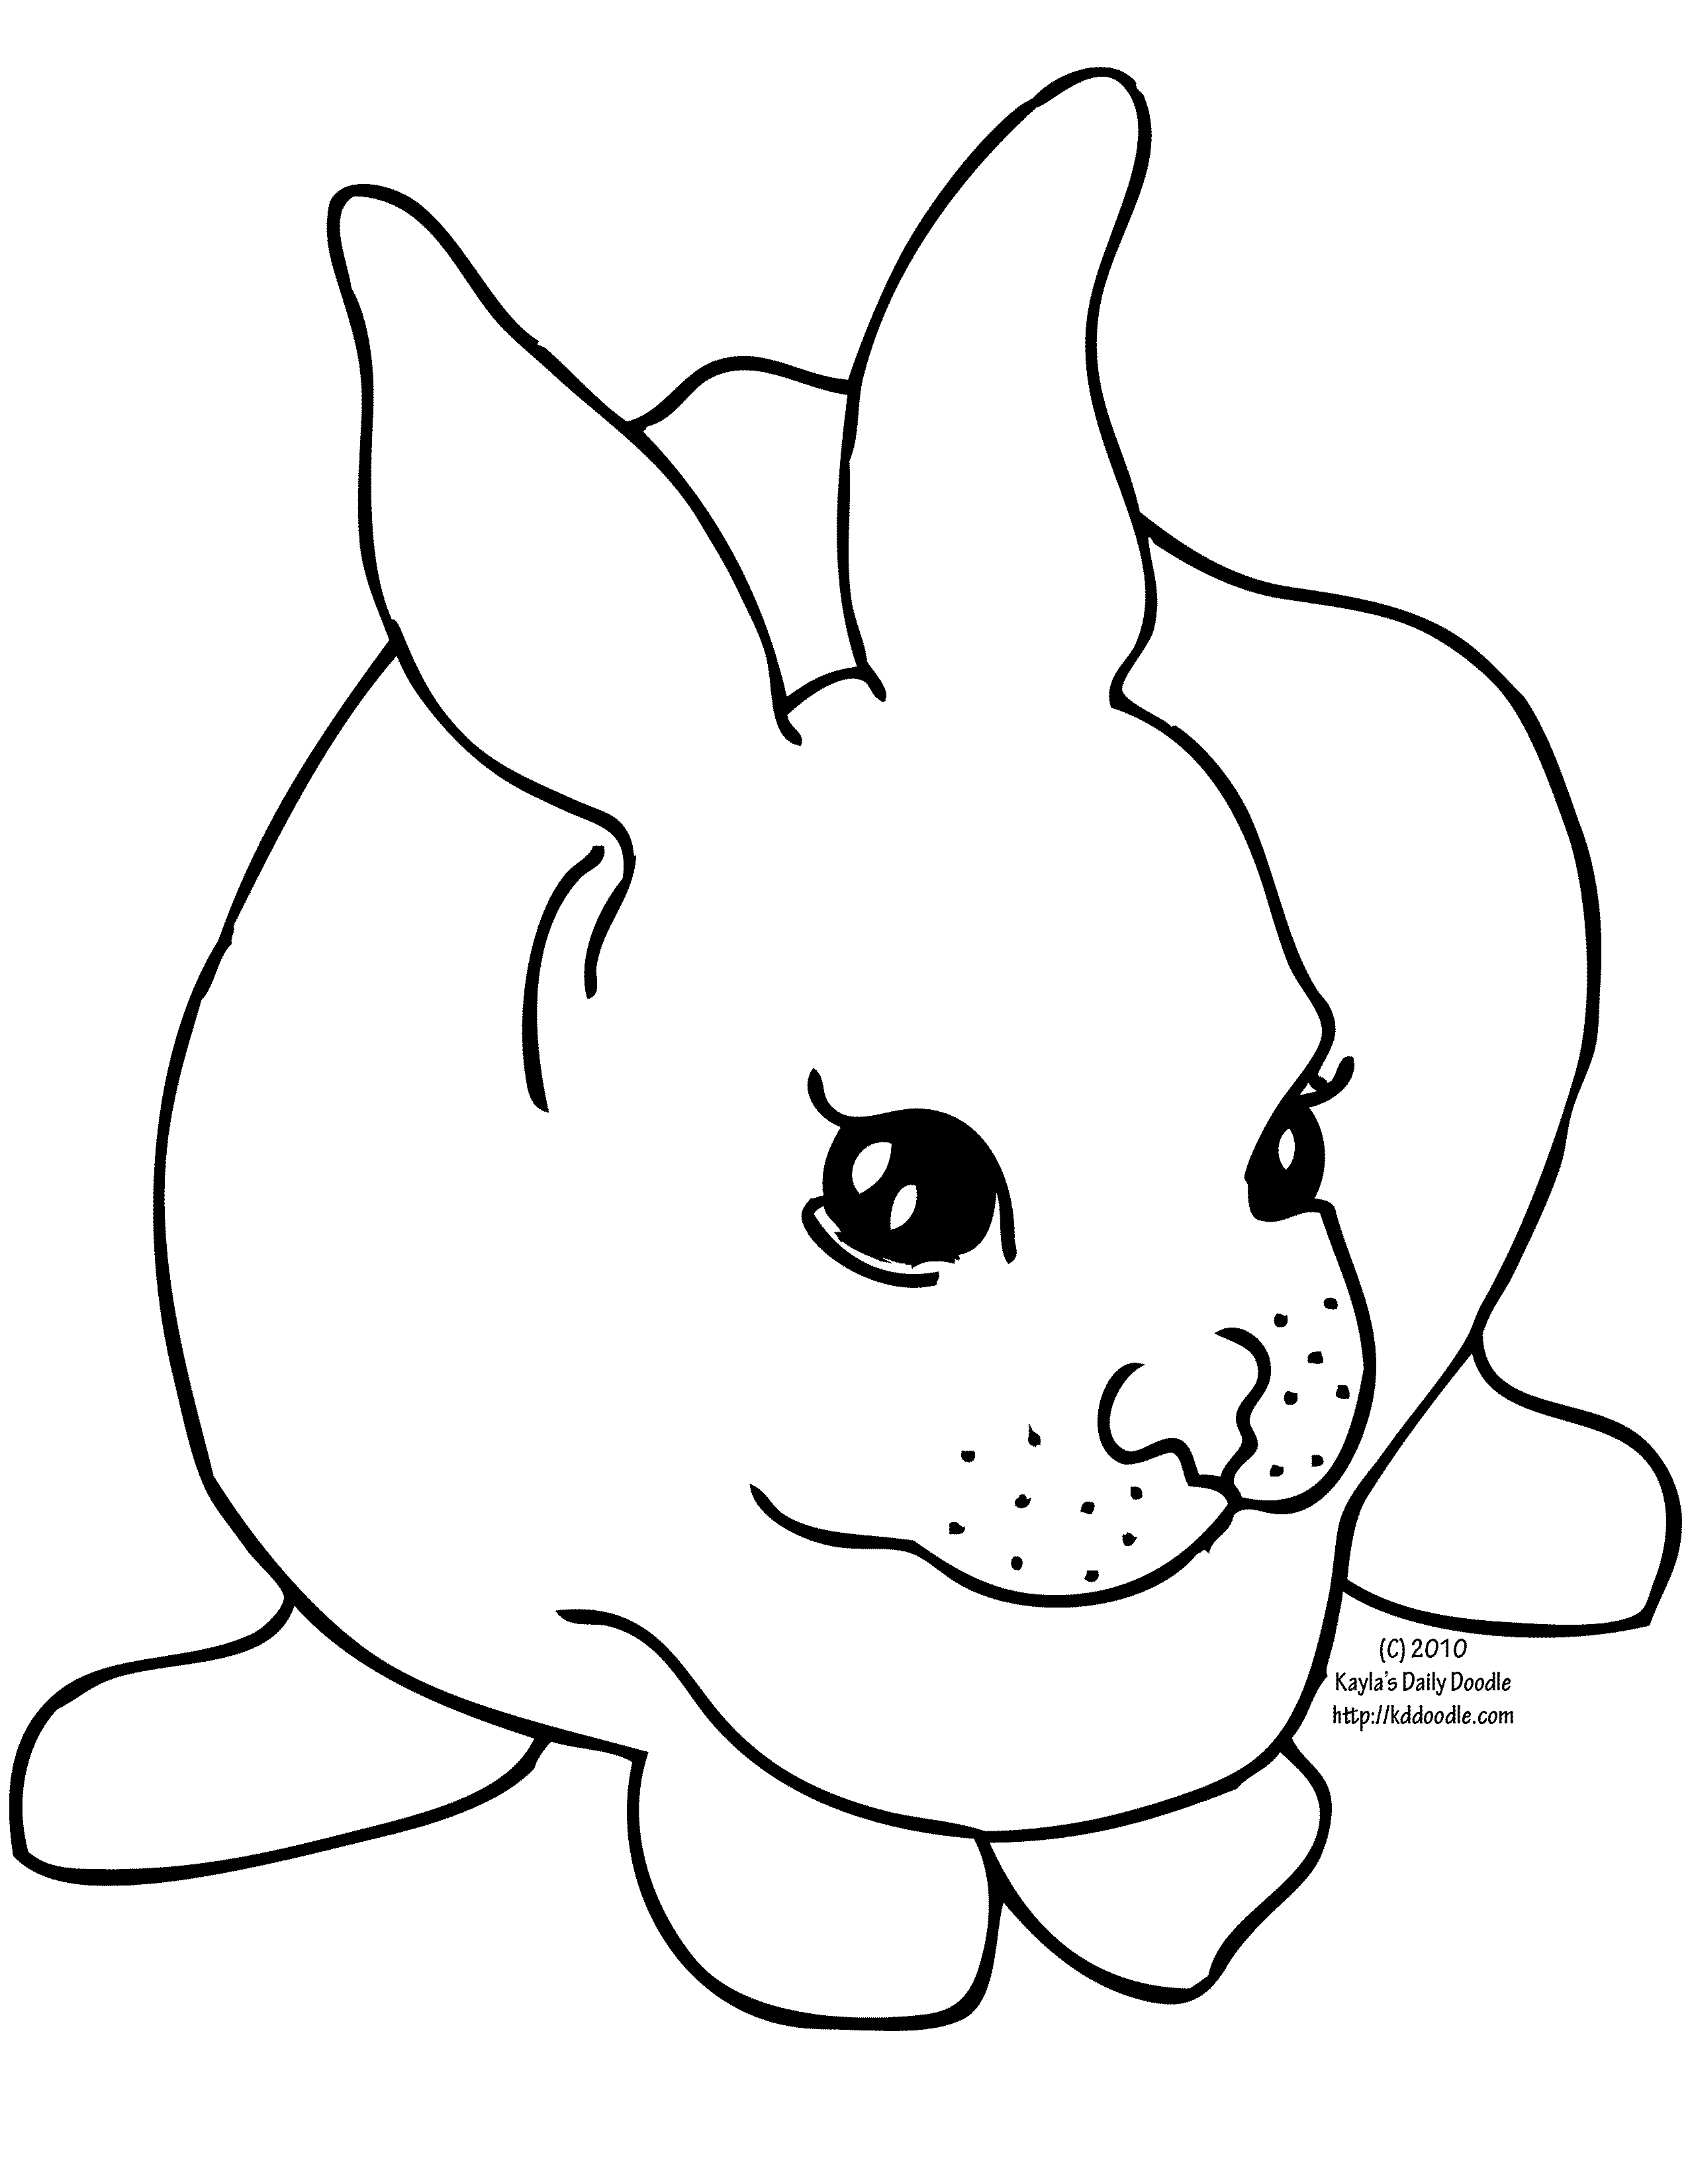 free-rabbit-line-art-download-free-rabbit-line-art-png-images-free-cliparts-on-clipart-library